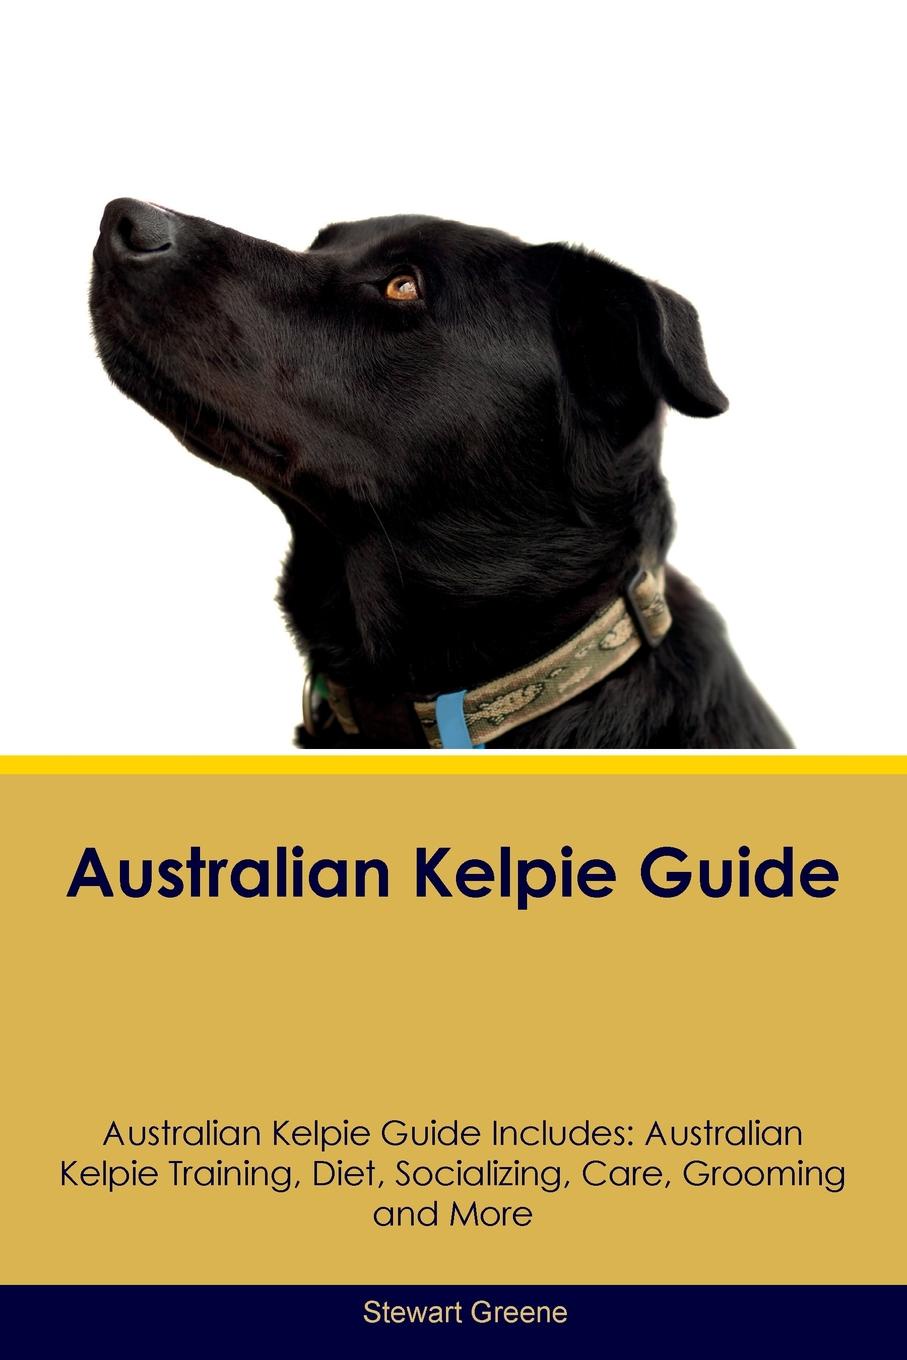 Australian Kelpie Guide Australian Kelpie Guide Includes. Australian Kelpie Training, Diet, Socializing, Care, Grooming, Breeding and More